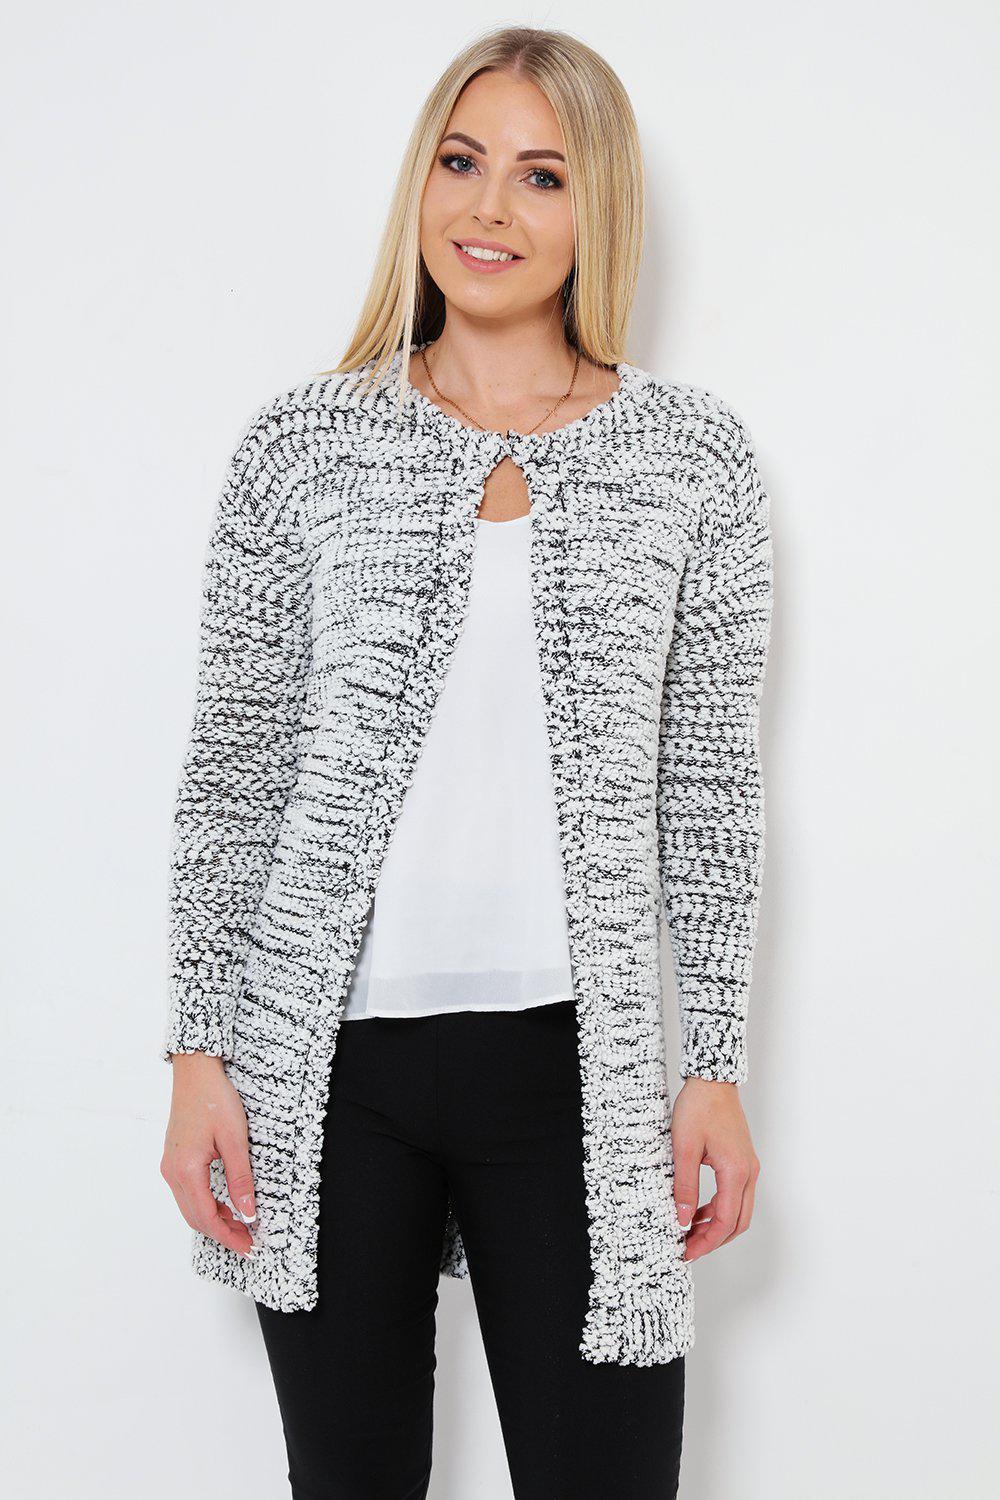 Get Large Boucle Knit Open Front Black White Cardigan for only £5.00 ...